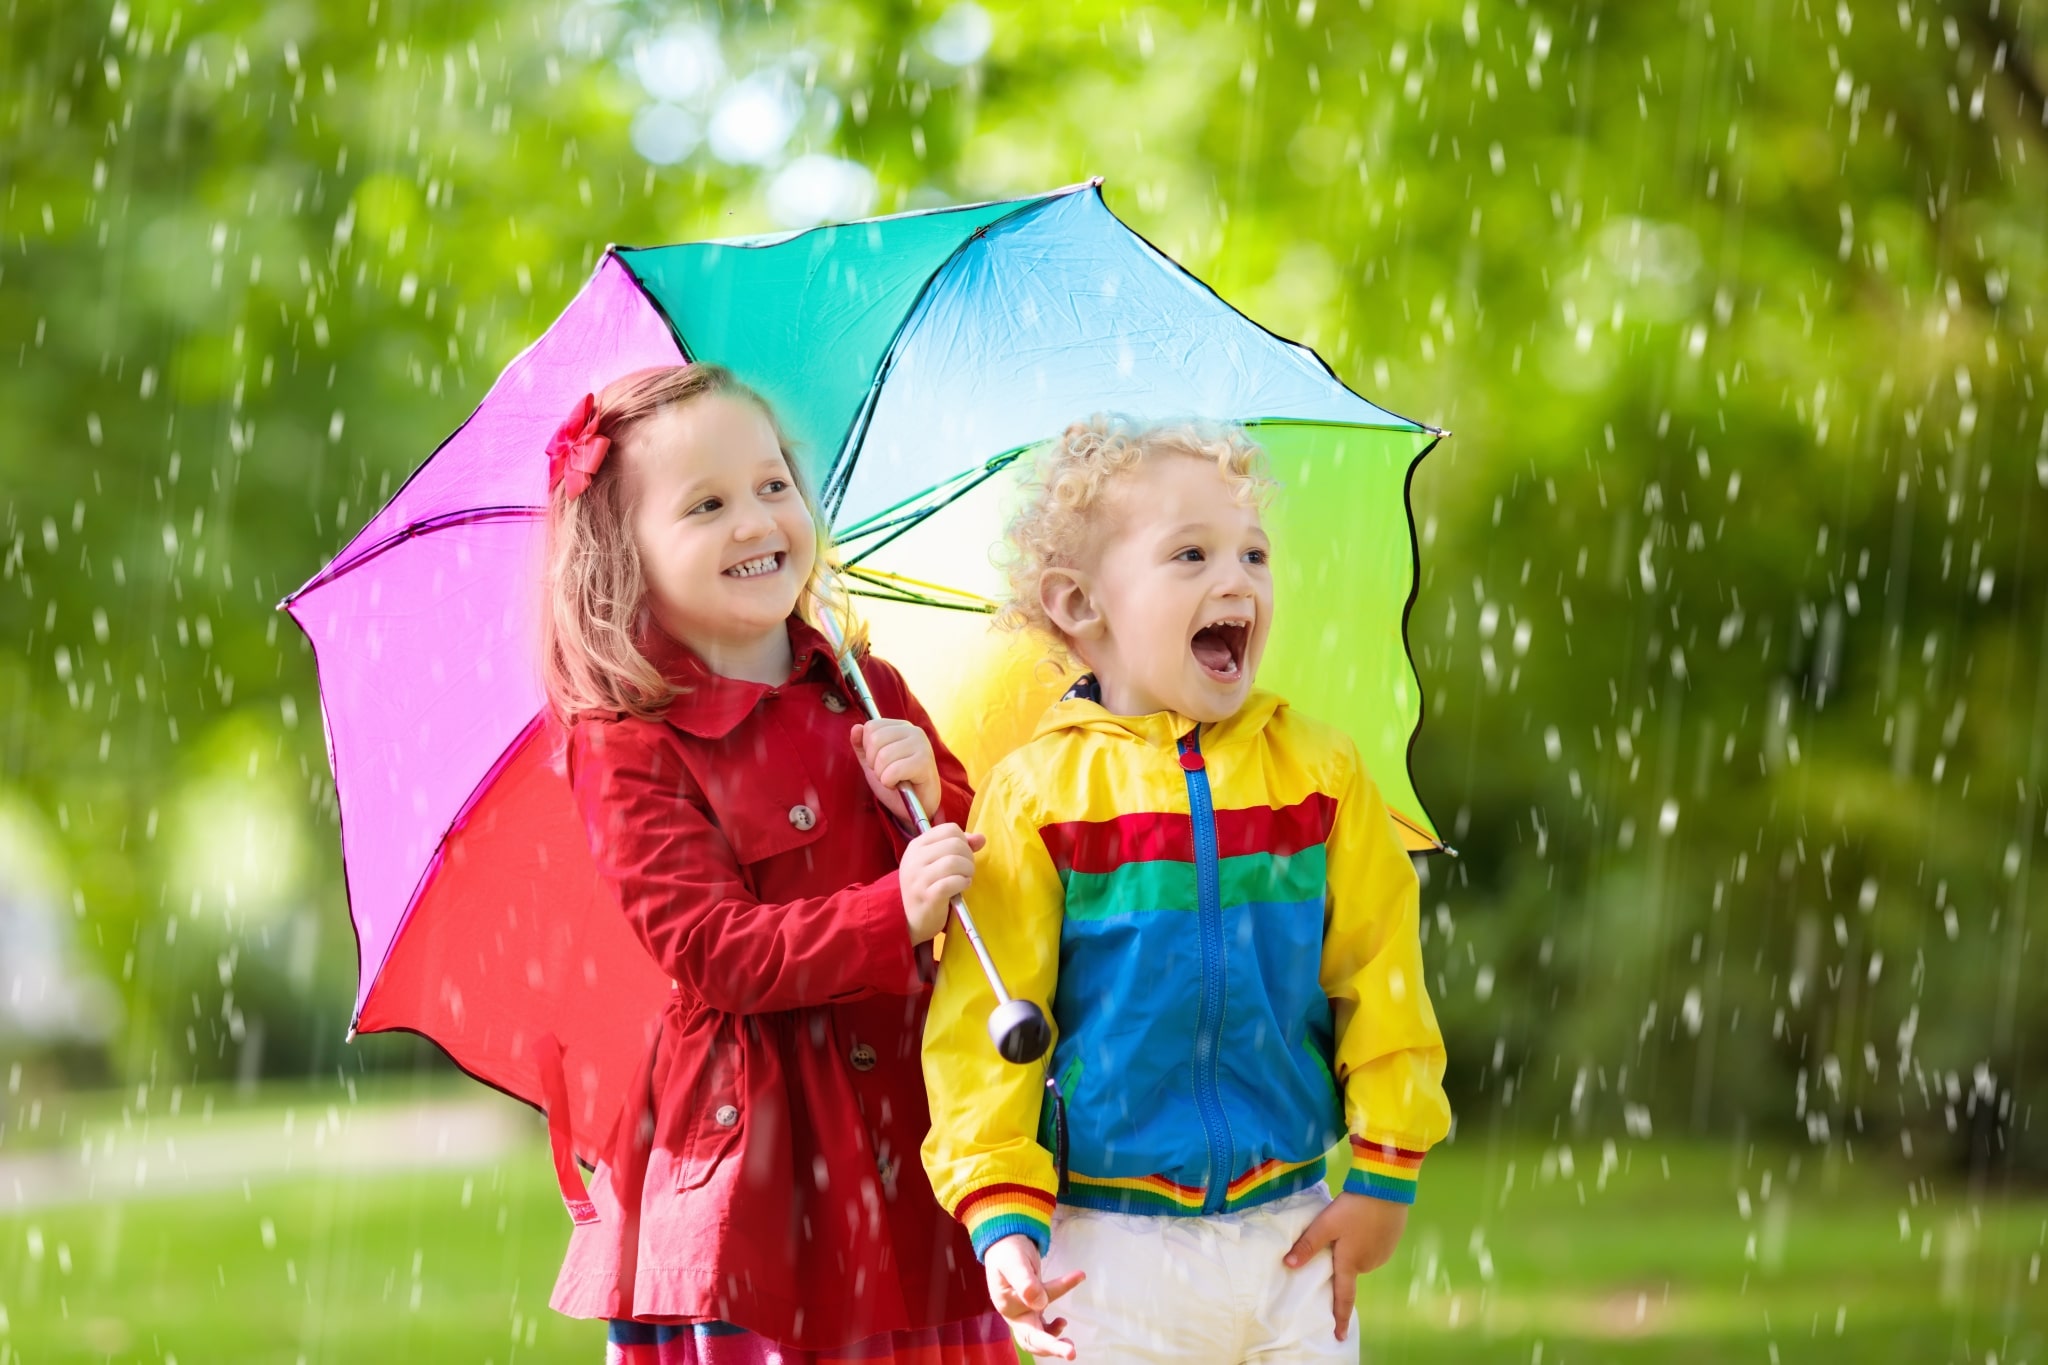 Kids playing in the rain under colorful umbrella